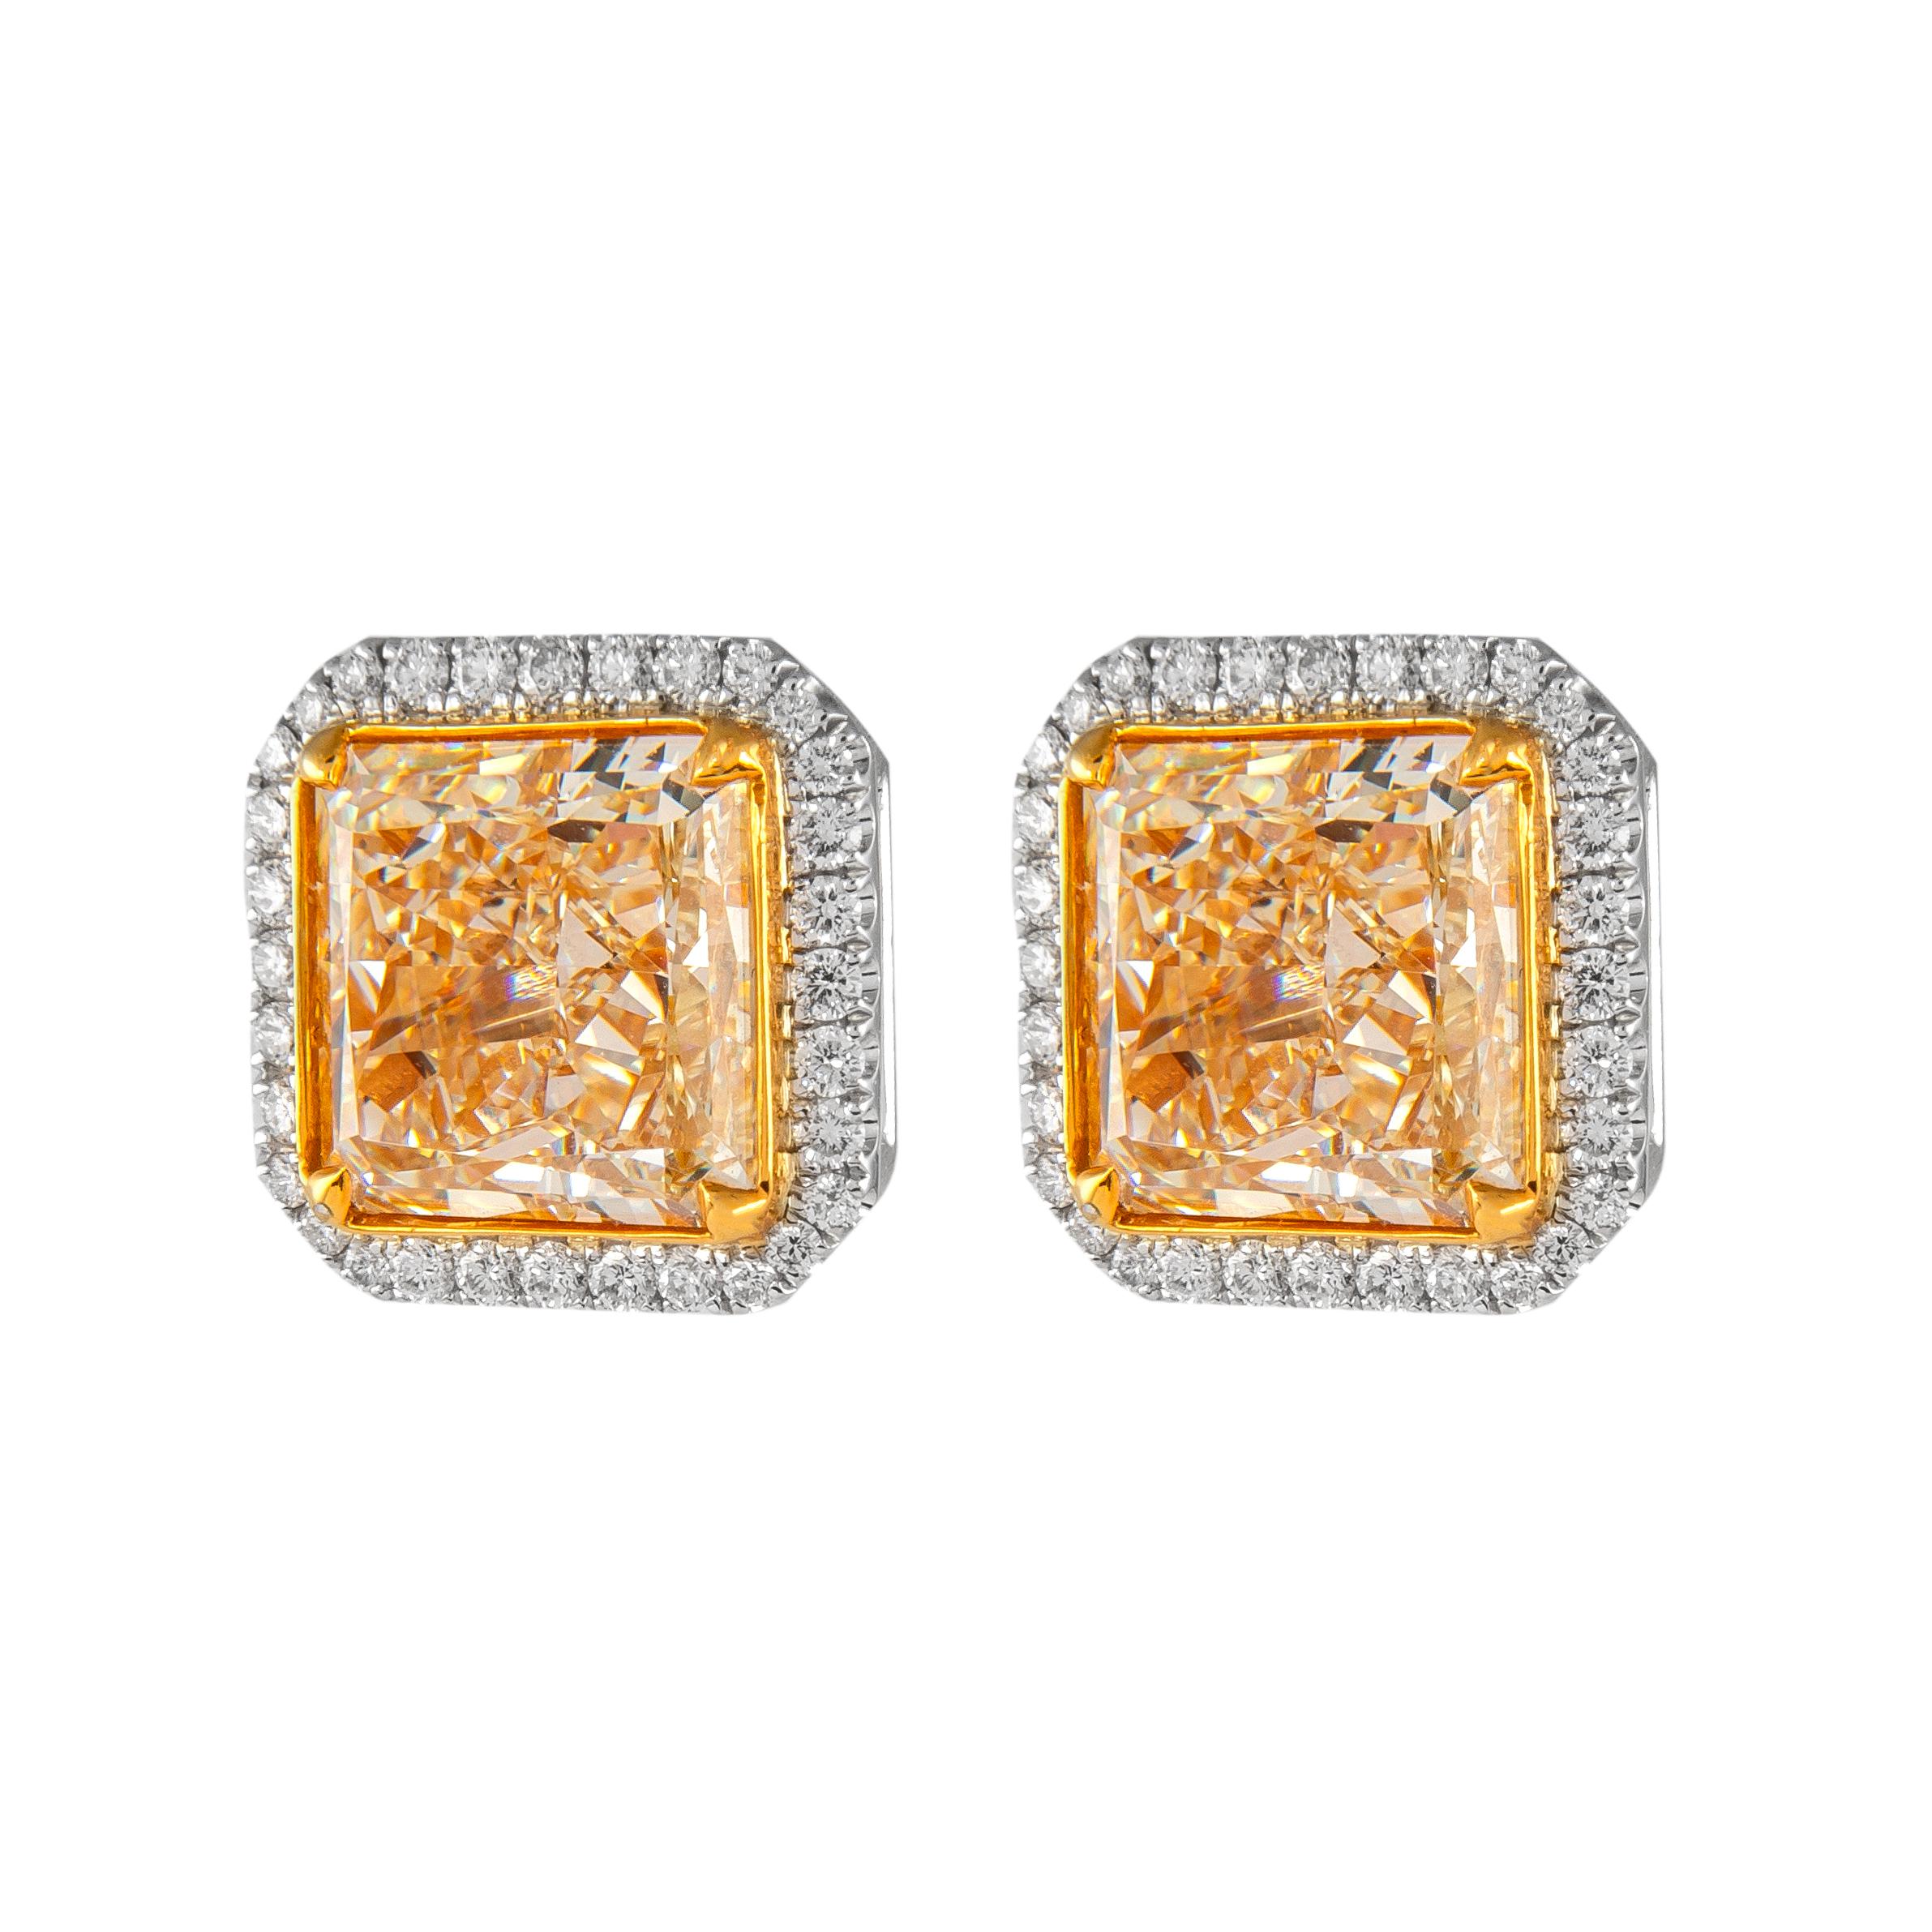 Stunning yellow diamond stud earrings with diamond halo, EGL certified. High jewelry by Alexander Beverly Hills.  
13.64 carats total diamond weight.
2 radiant cut diamonds, 12.84 carats. Both Fancy Yellow color, one stone VS1 clarity and the other